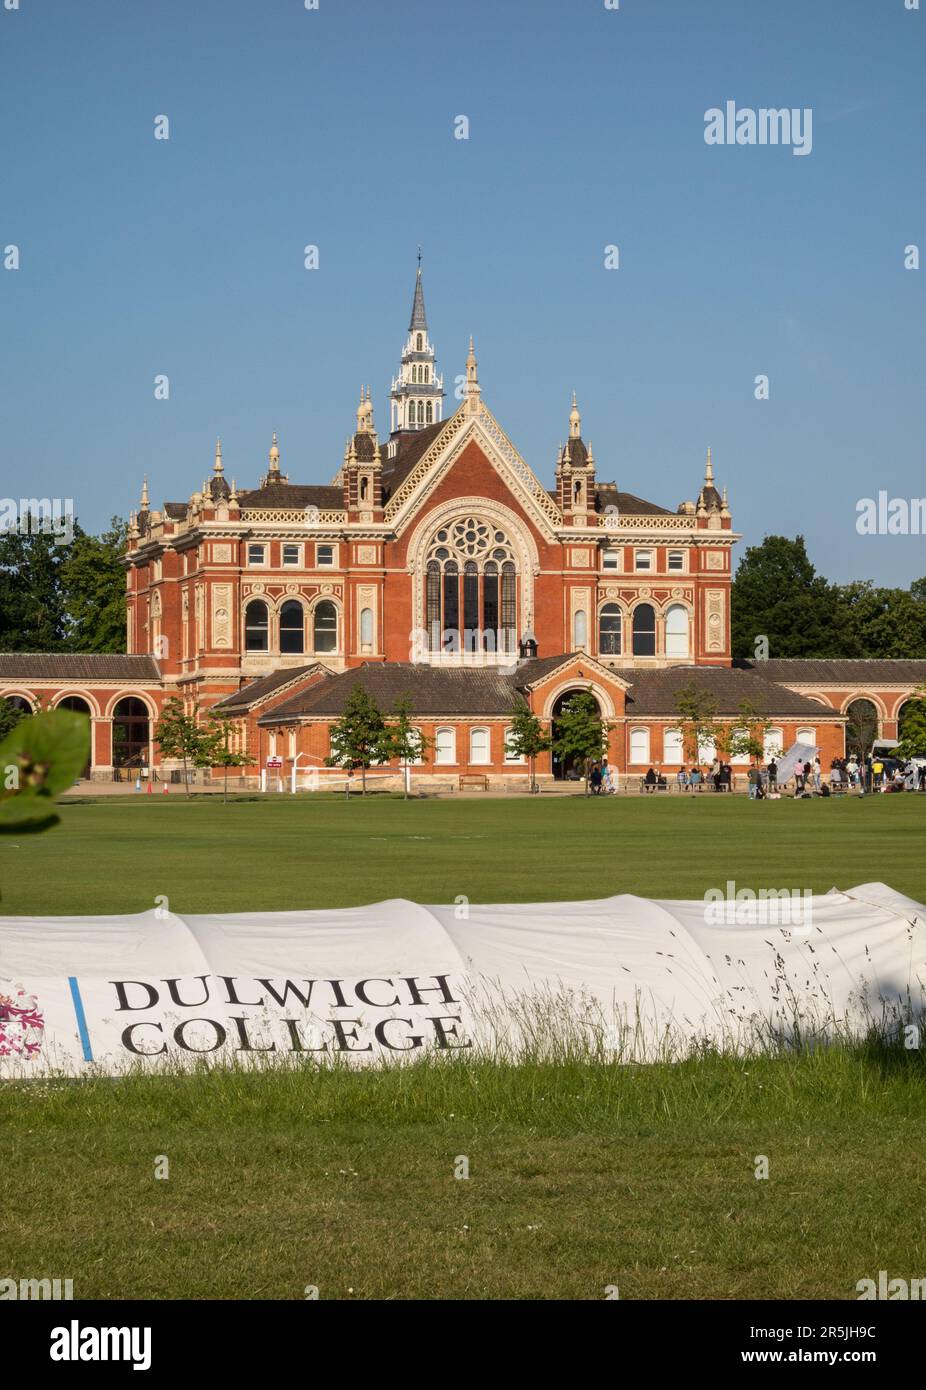 Dulwich College buildings and grounds on a glorious summer's day set against a blue sky, London, England, U.K. Stock Photo